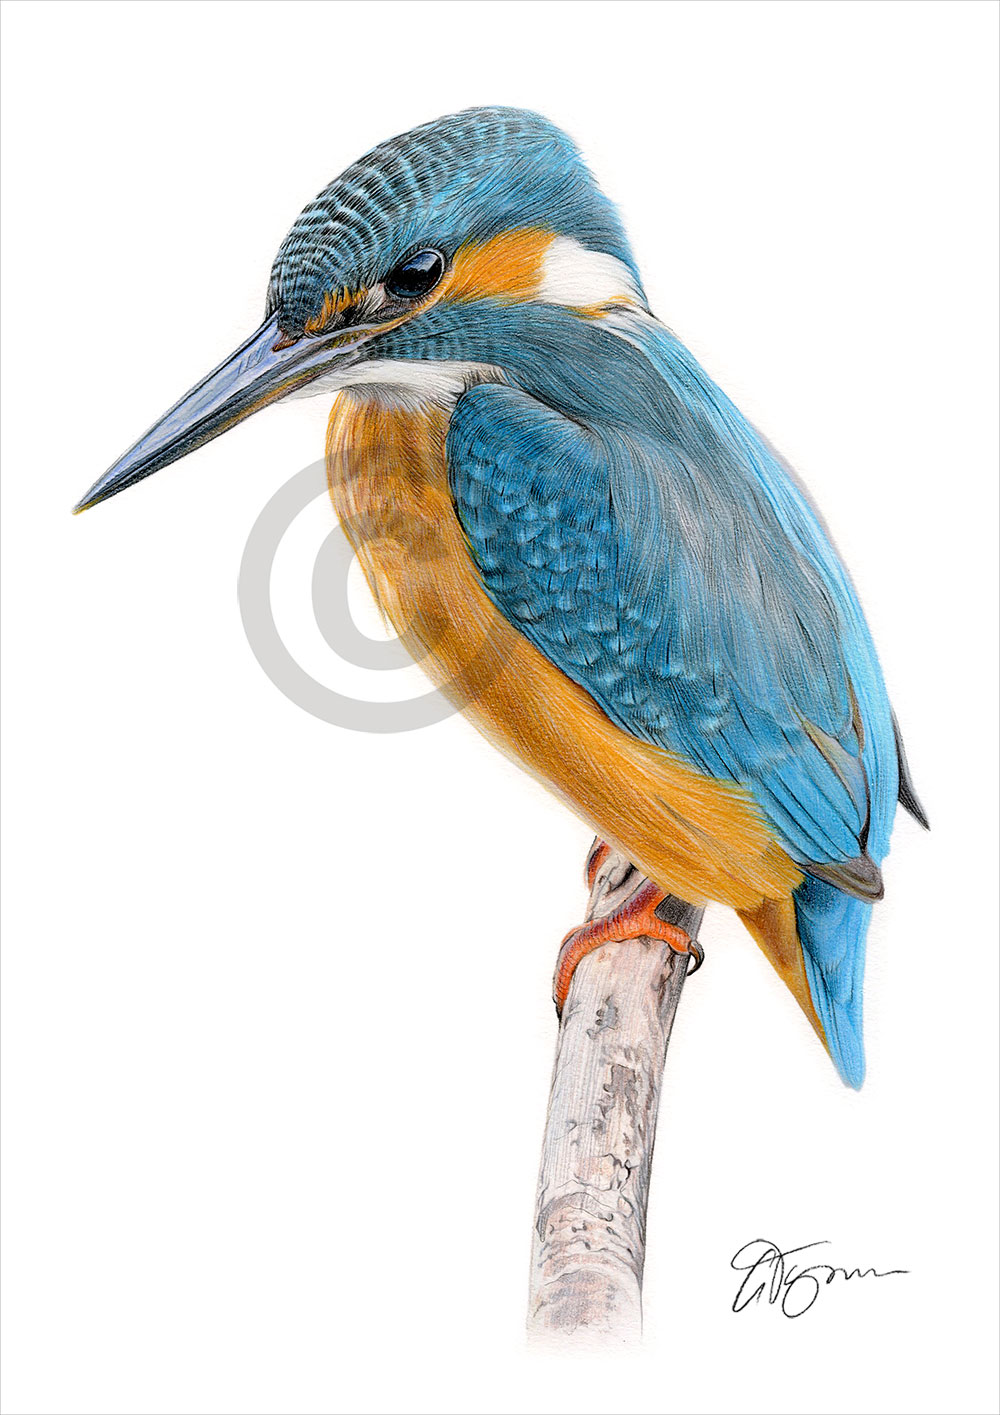 Colour pencil drawing of a Kingfisher by UK artist Gary Tymon